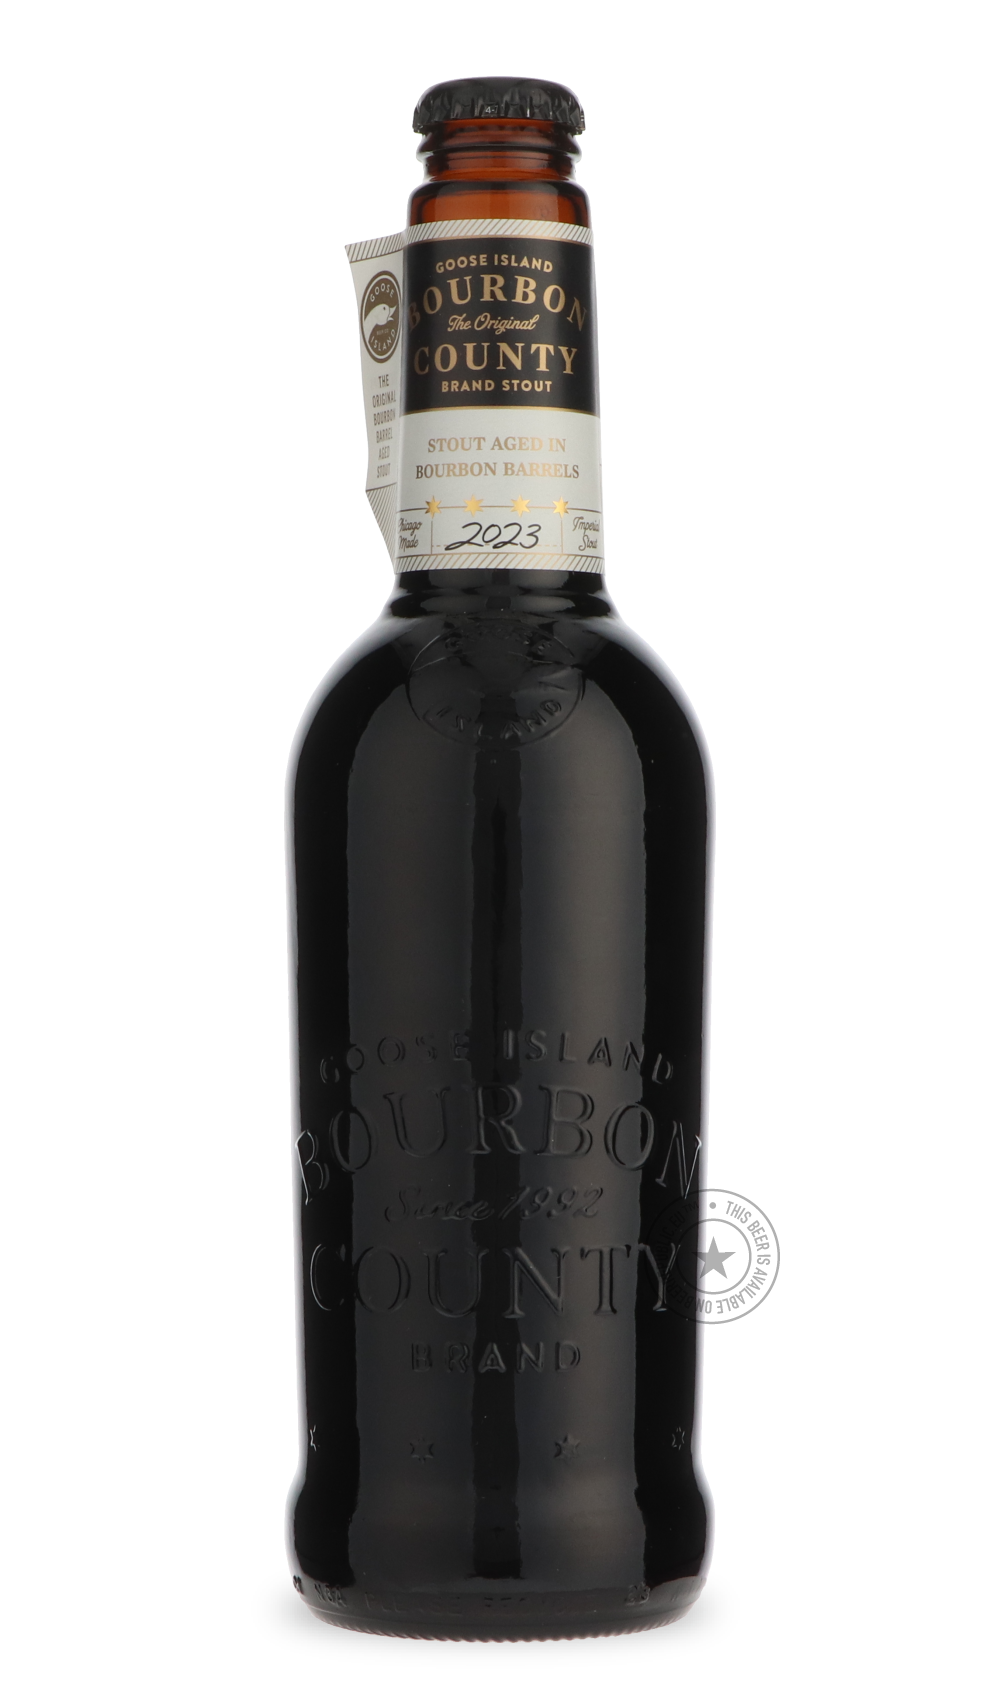 -Goose Island- Bourbon County Brand Stout 2023 14.6%-Stout & Porter- Only @ Beer Republic - The best online beer store for American & Canadian craft beer - Buy beer online from the USA and Canada - Bier online kopen - Amerikaans bier kopen - Craft beer store - Craft beer kopen - Amerikanisch bier kaufen - Bier online kaufen - Acheter biere online - IPA - Stout - Porter - New England IPA - Hazy IPA - Imperial Stout - Barrel Aged - Barrel Aged Imperial Stout - Brown - Dark beer - Blond - Blonde - Pilsner - La